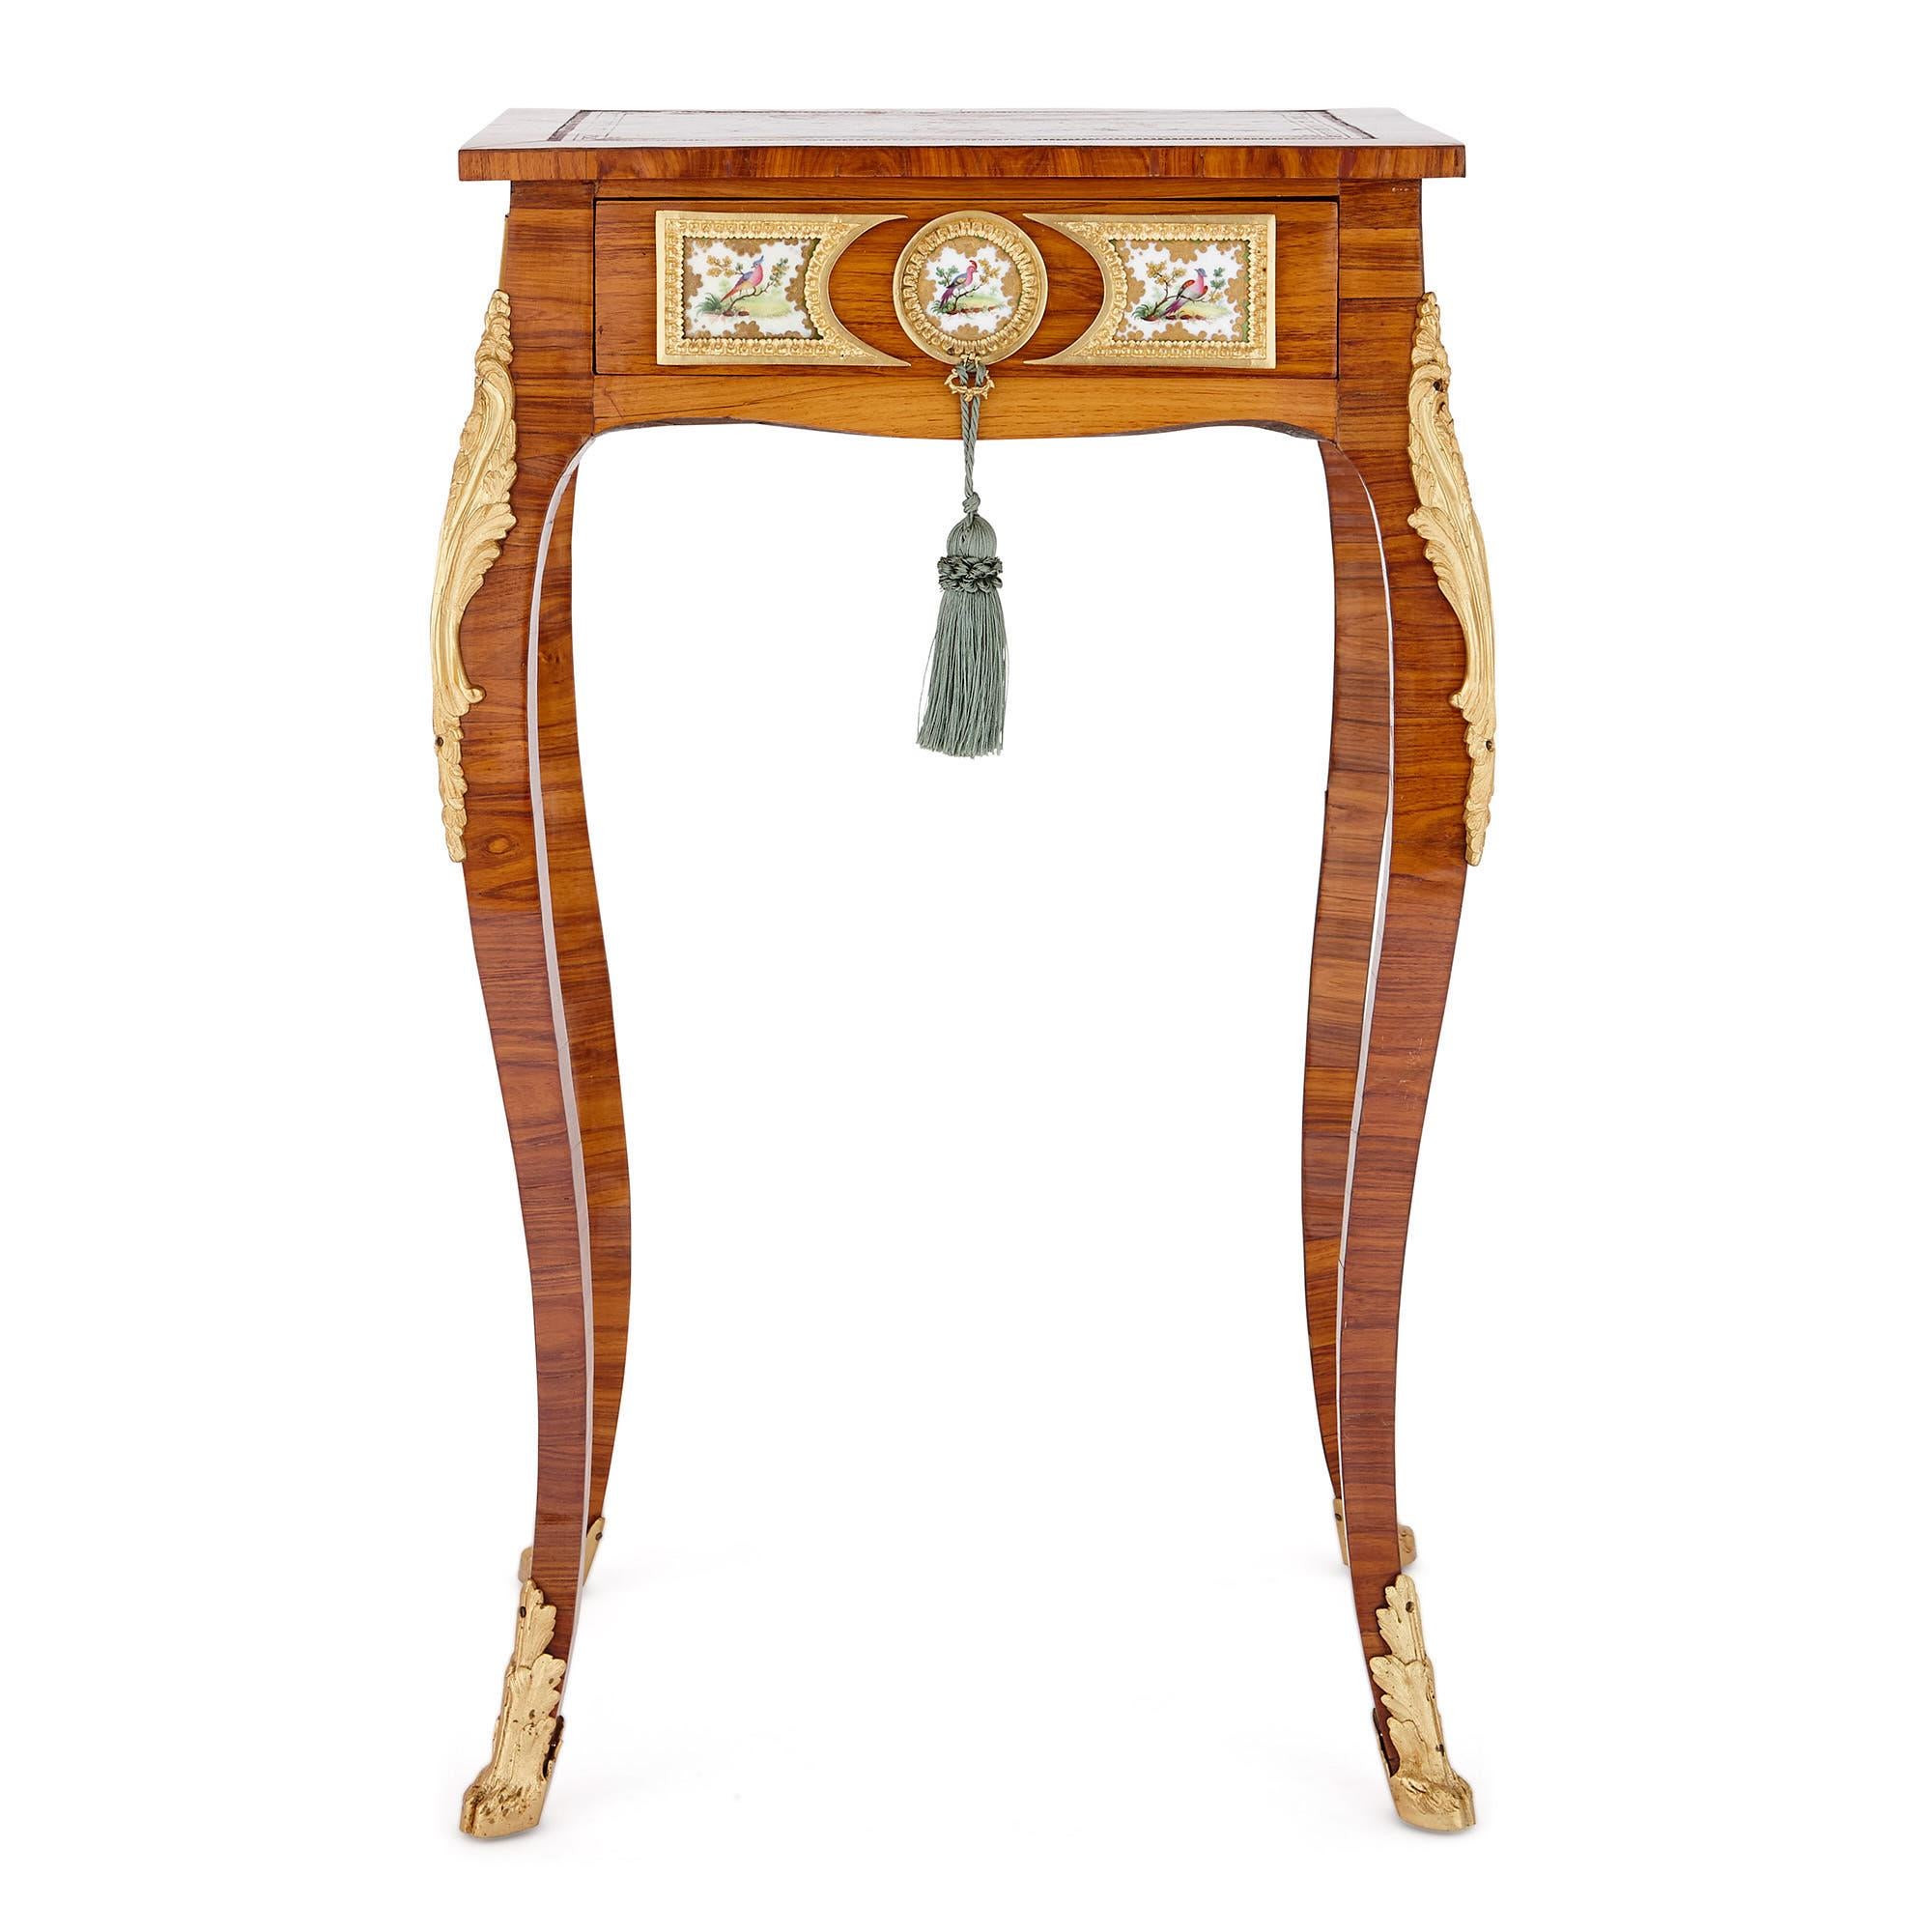 This beautiful side table was designed in France in the 19th century in the fashionable Rococo, or Louis XV, style. The piece has been crafted from kingwood and decorated with painted porcelain plaques and ornamental gilt bronze mounts. 

The